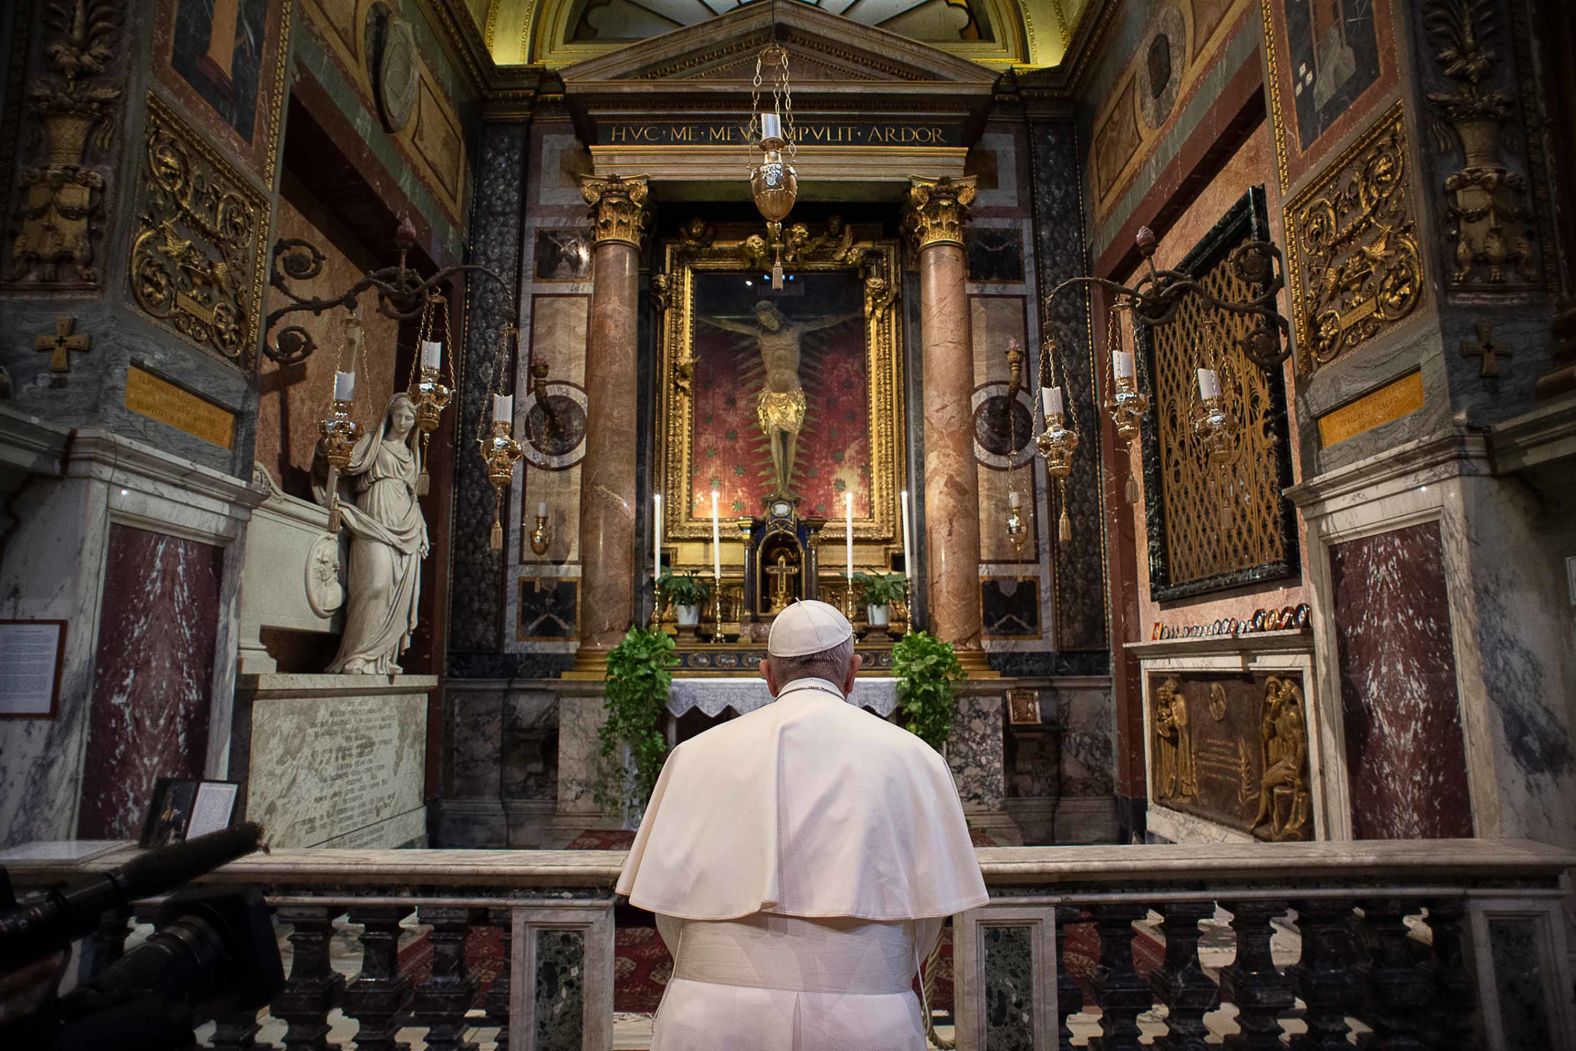 Pope Francis, inside the Church of San Marcello in Rome's city center,<a href="index.php?page=&url=https%3A%2F%2Fedition.cnn.com%2F2020%2F03%2F16%2Feurope%2Fpope-francis-prayer-coronavirus-plague-crucifix-intl%2Findex.html" target="_blank"> prays at a famous crucifix</a> that believers claim helped to save Romans from the plague in 1522.